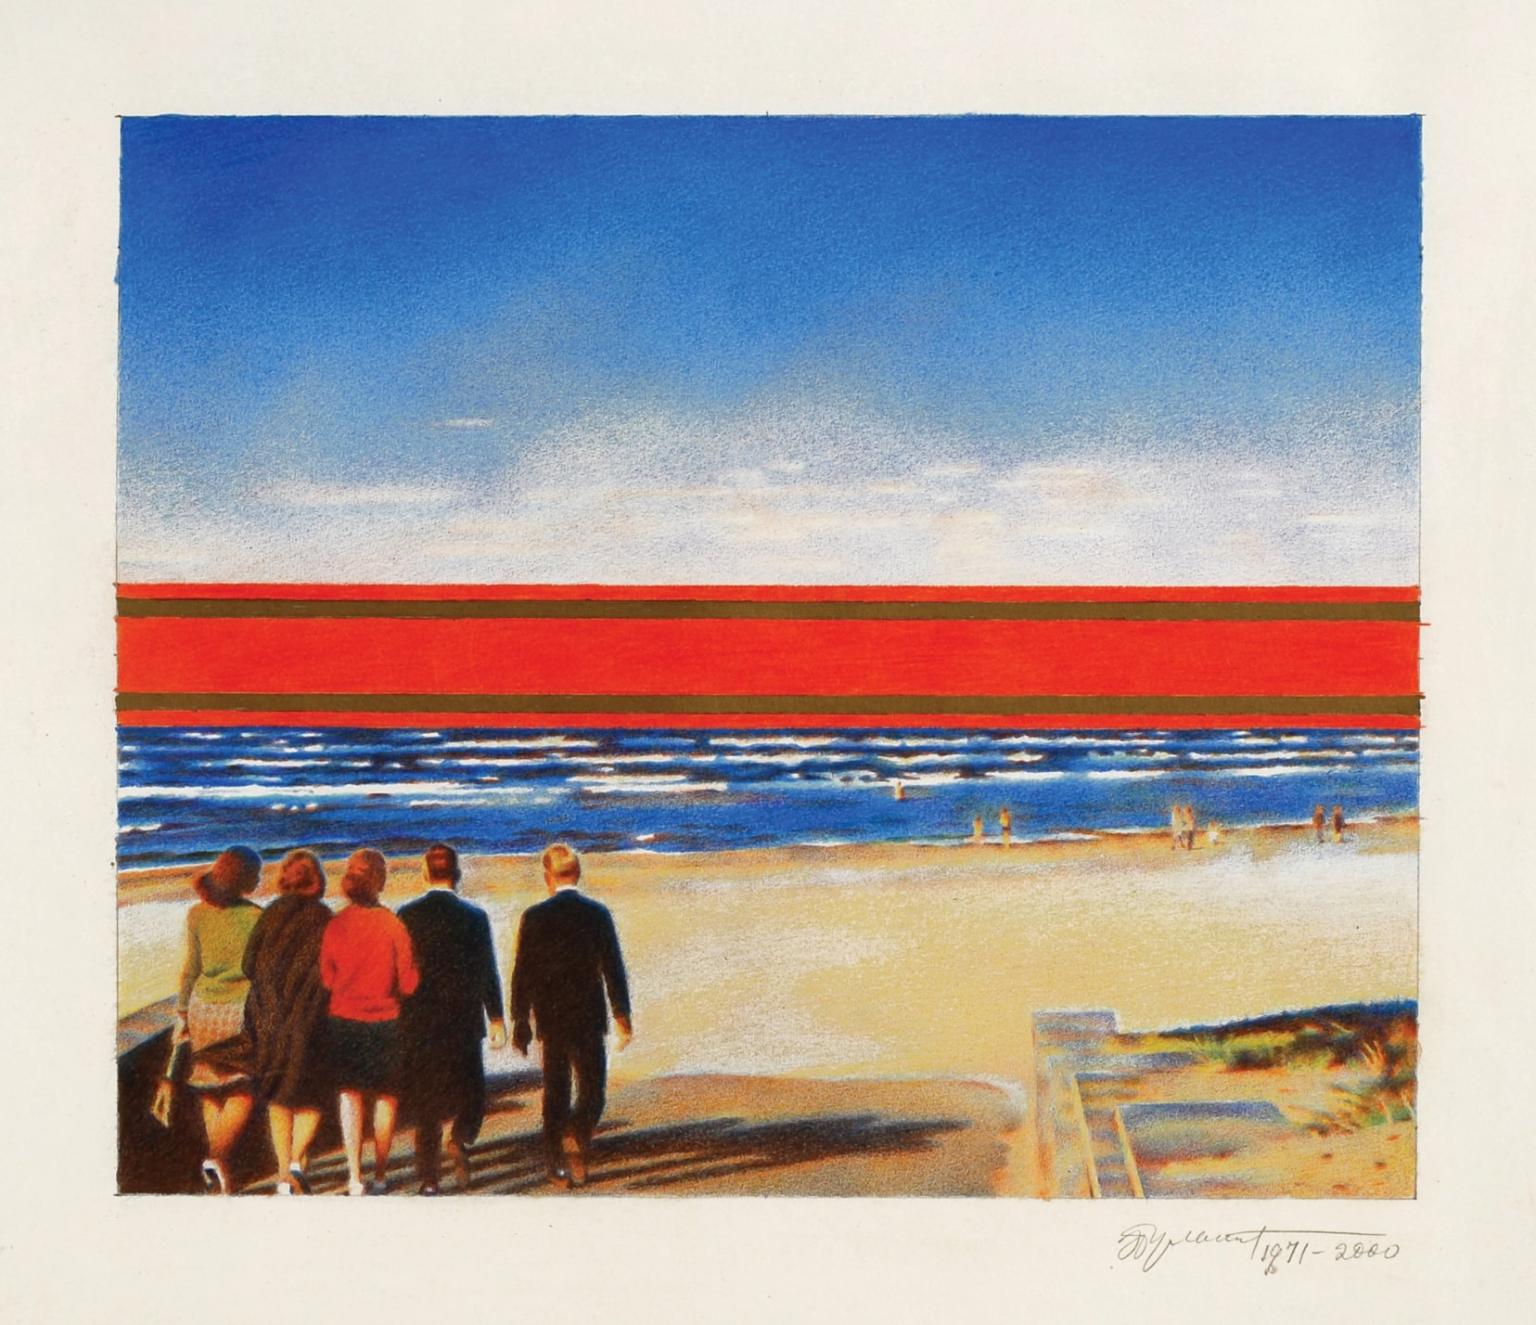 Painting depicting three women and two men walking toward the ocean, away from the viewer, into bright horizon.